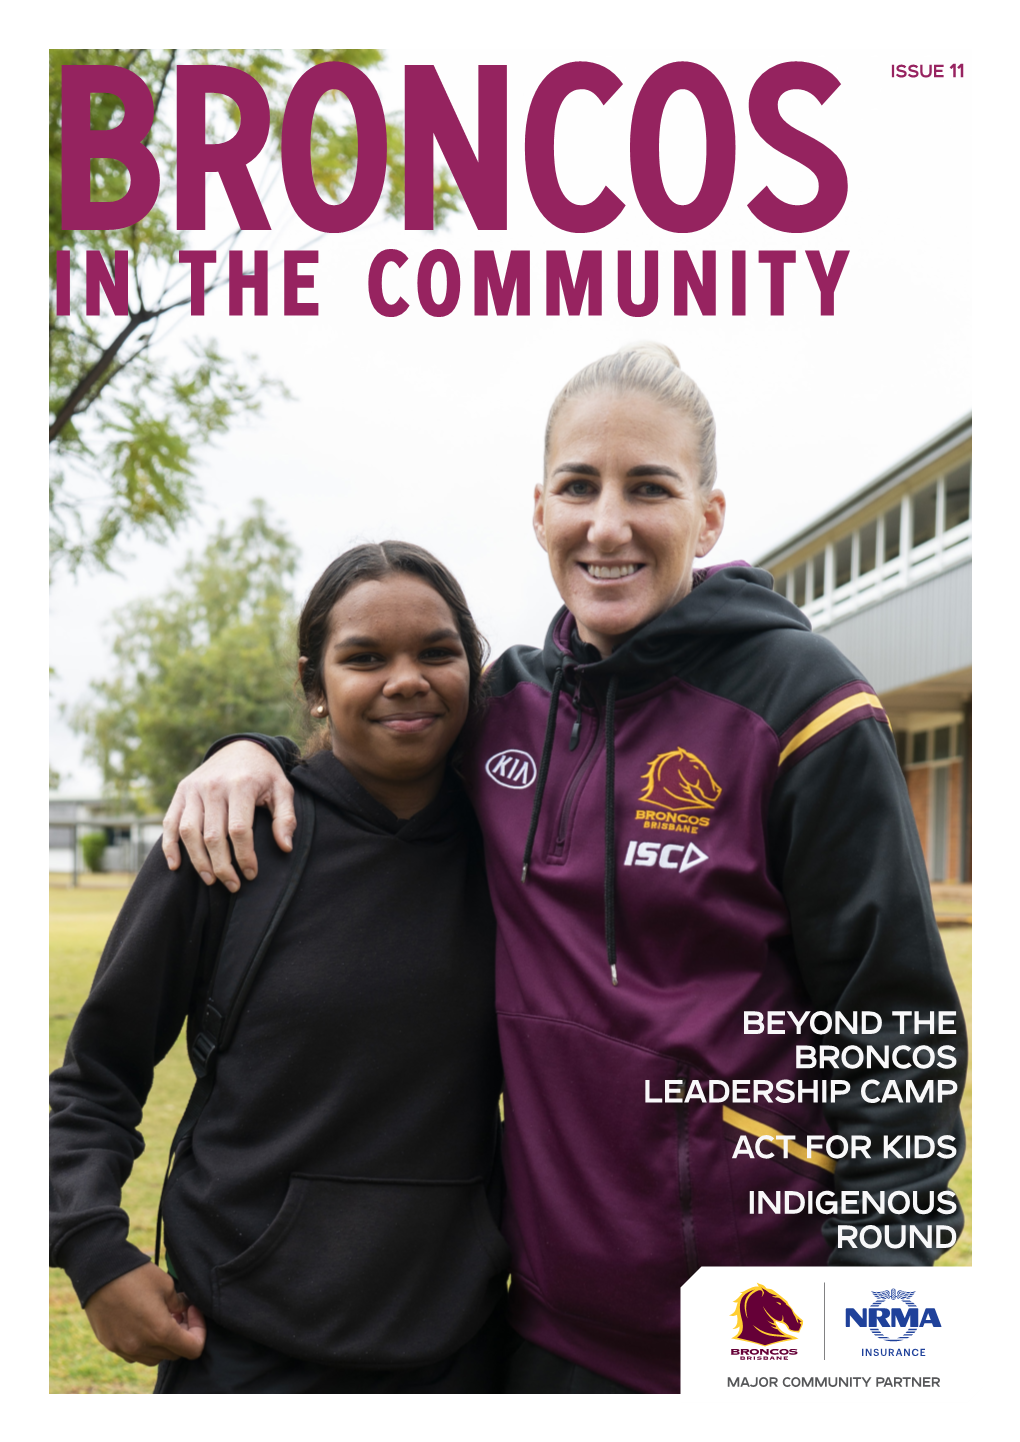 Beyond the Broncos Leadership Camp Act for Kids Indigenous Round Beyond the Broncos Leadership Camp